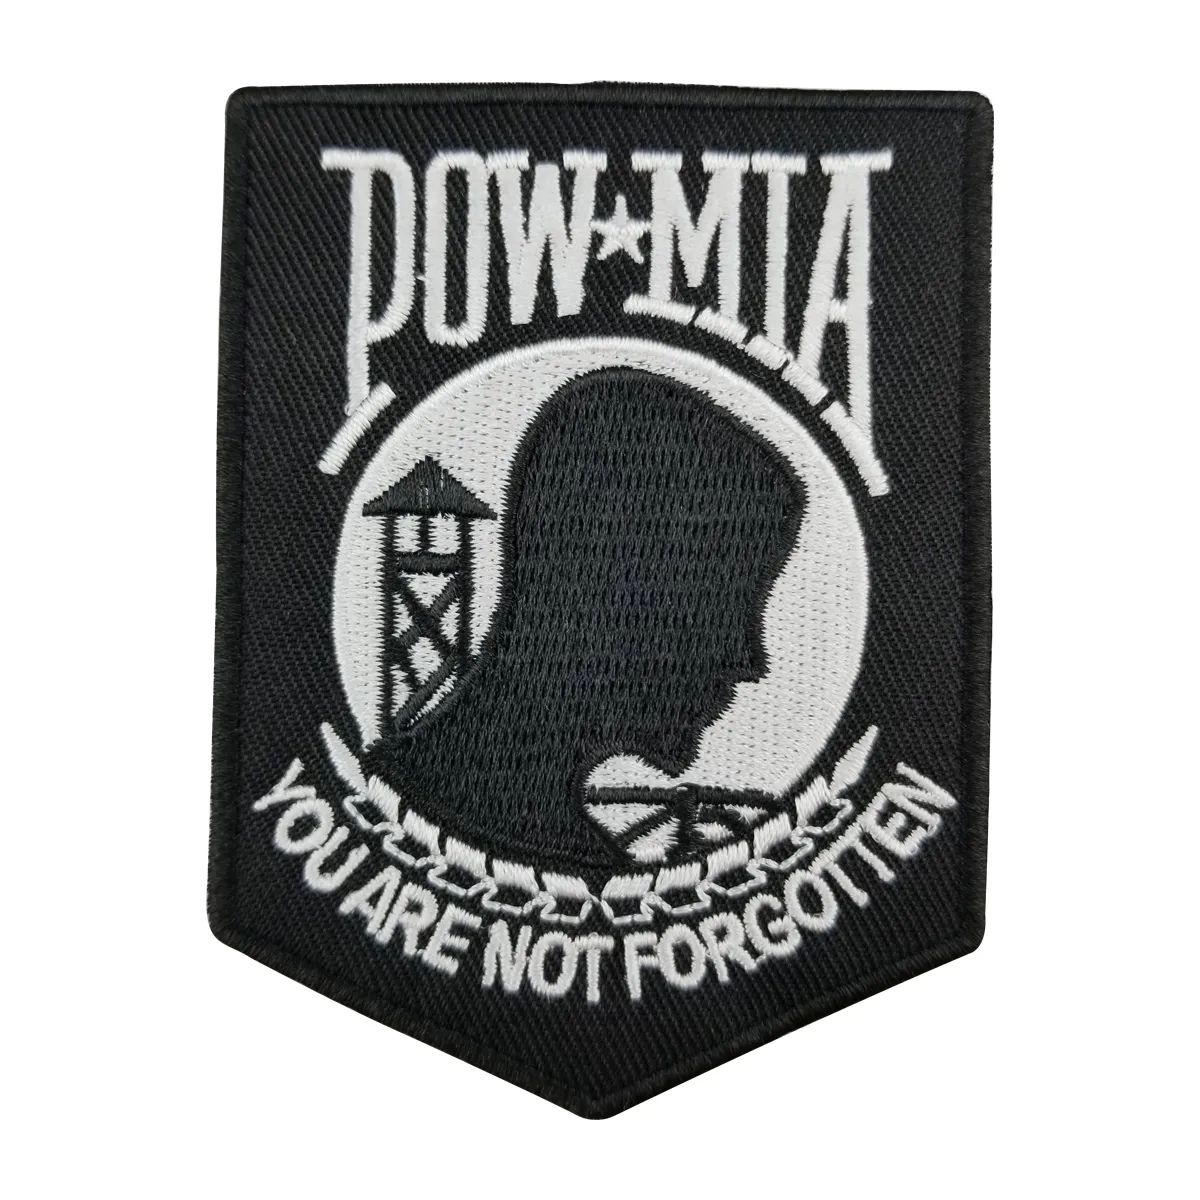 Hot Leathers Pow Mia Embroidered Patch Heat sealed backing For Motorcycle Biker Jacket Iron On Sew On Patch 3.5" G0176 Free Shipping